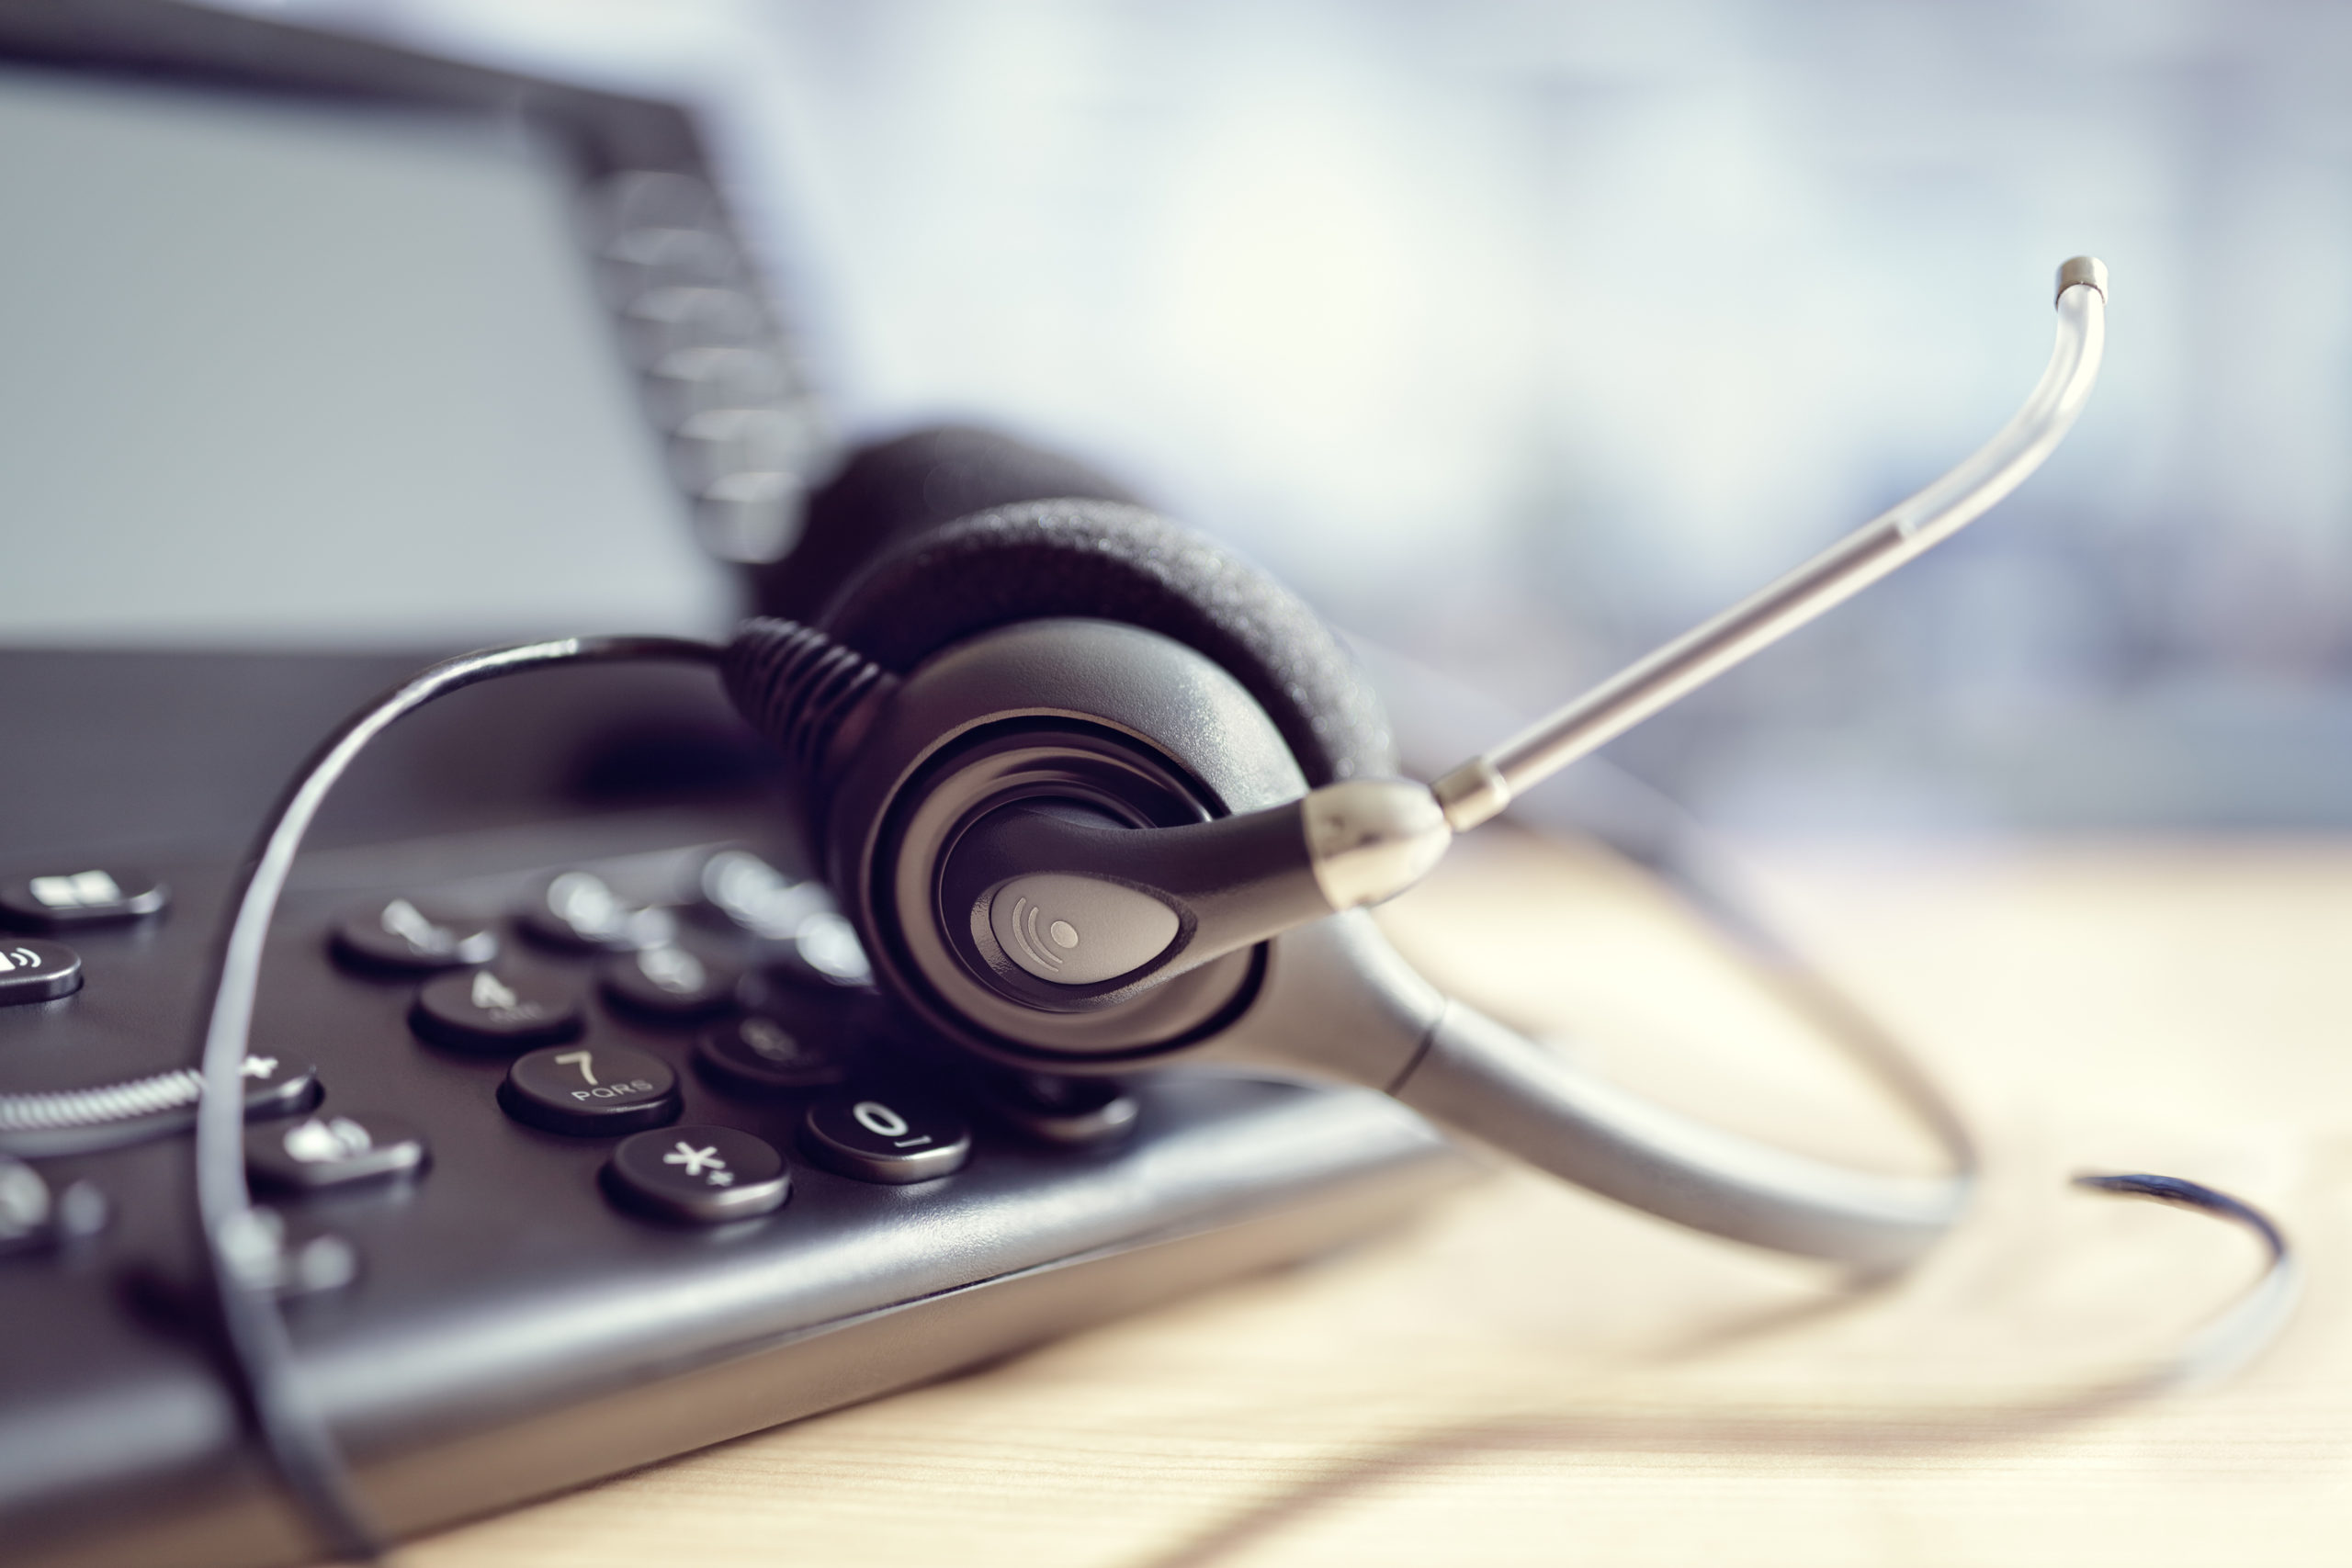 7 Important Things to Look for When Choosing a VoIP Phone System